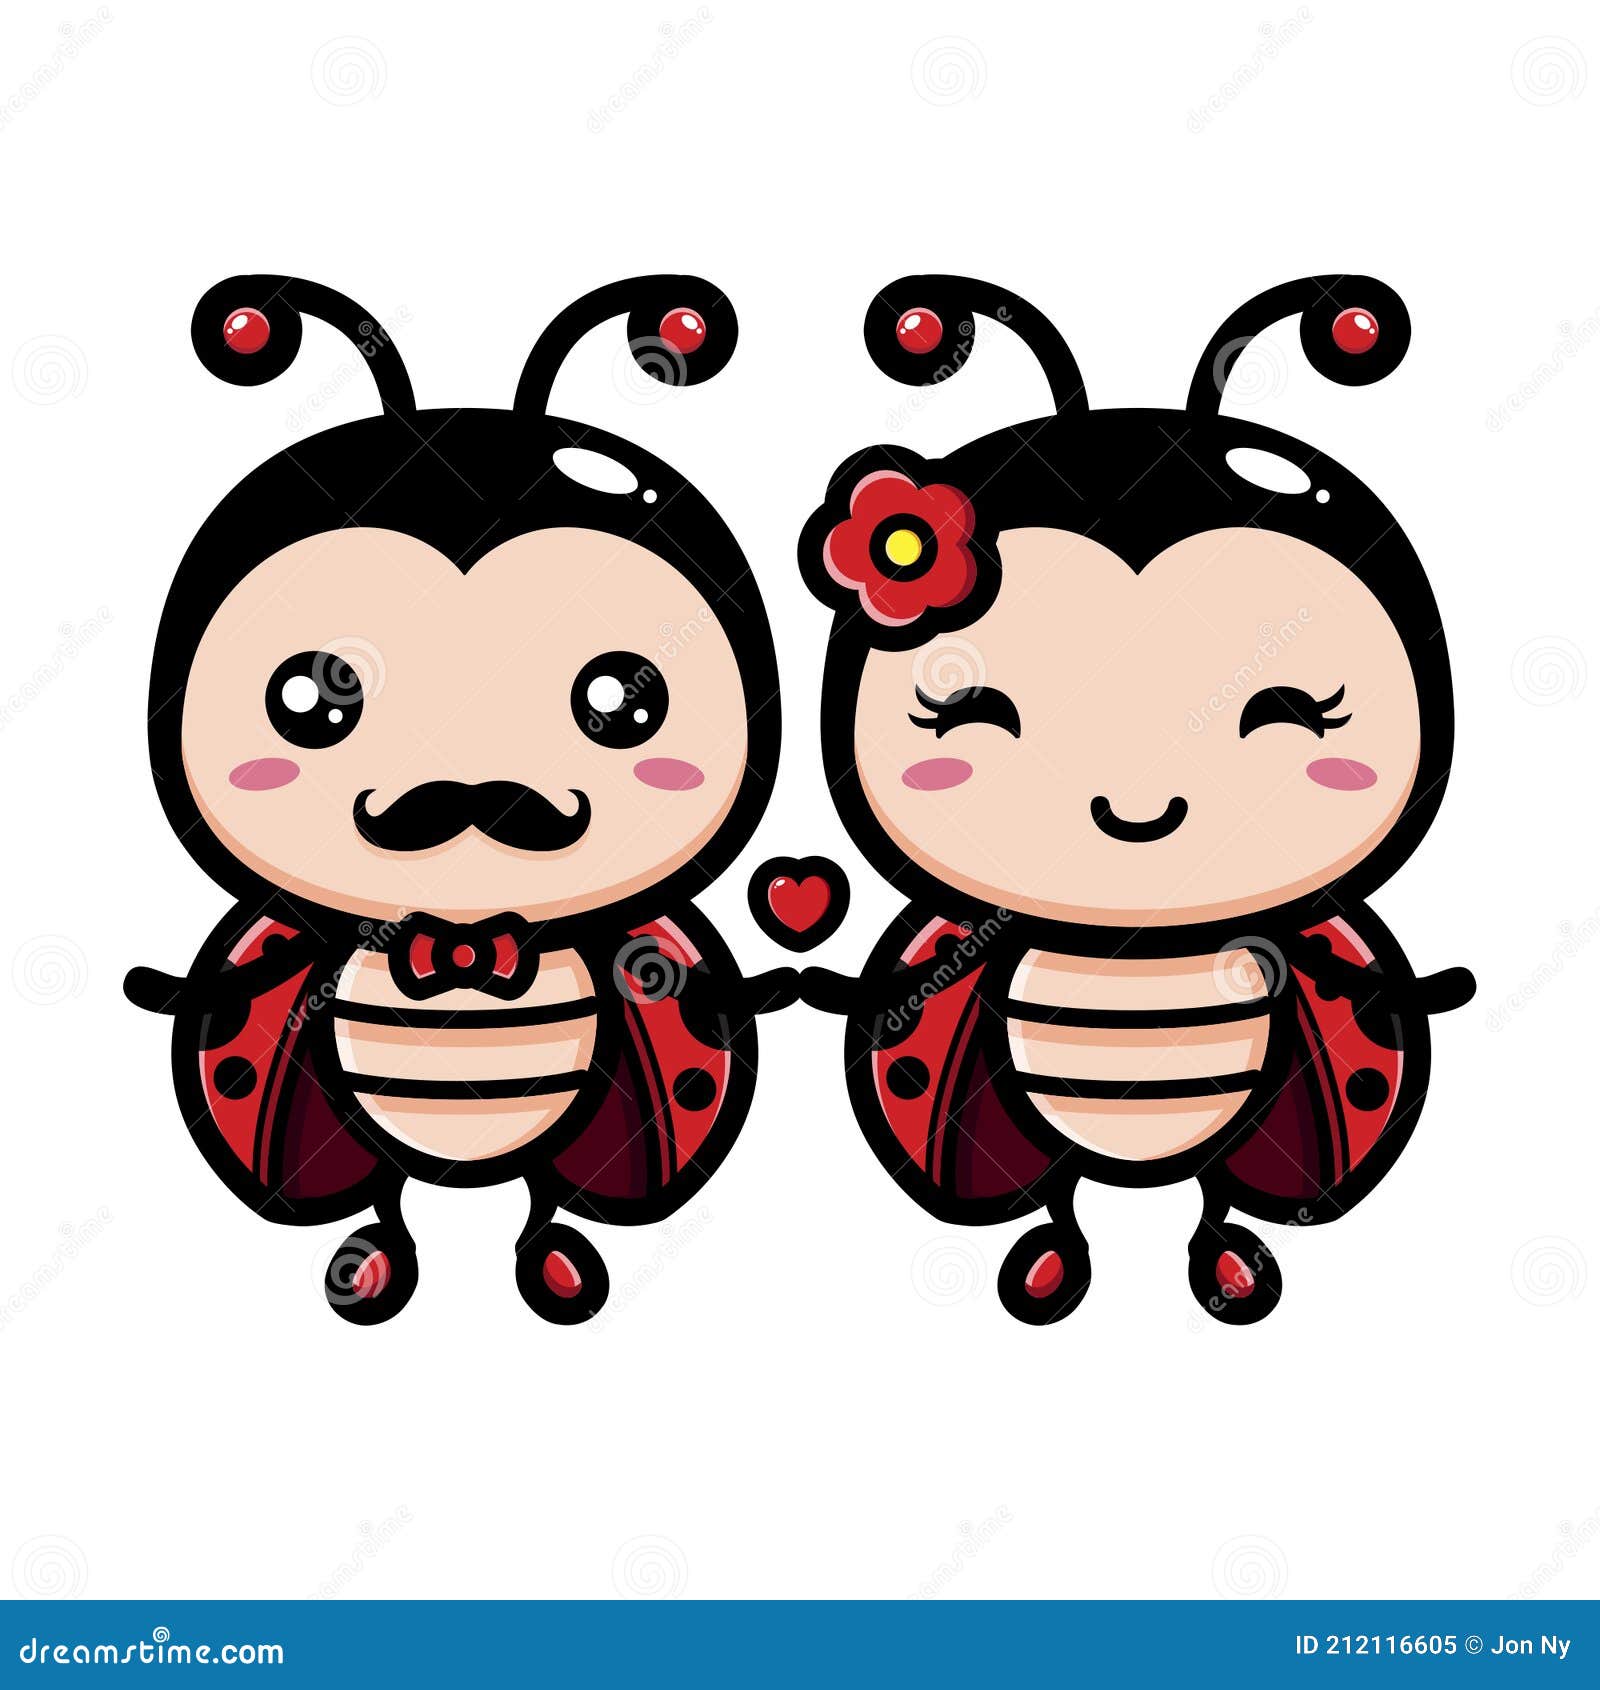 The Cartoon Character of a Cute Ladybug Boy and Girl Couple is Full of Love  Stock Vector - Illustration of chibi, happiness: 212116605